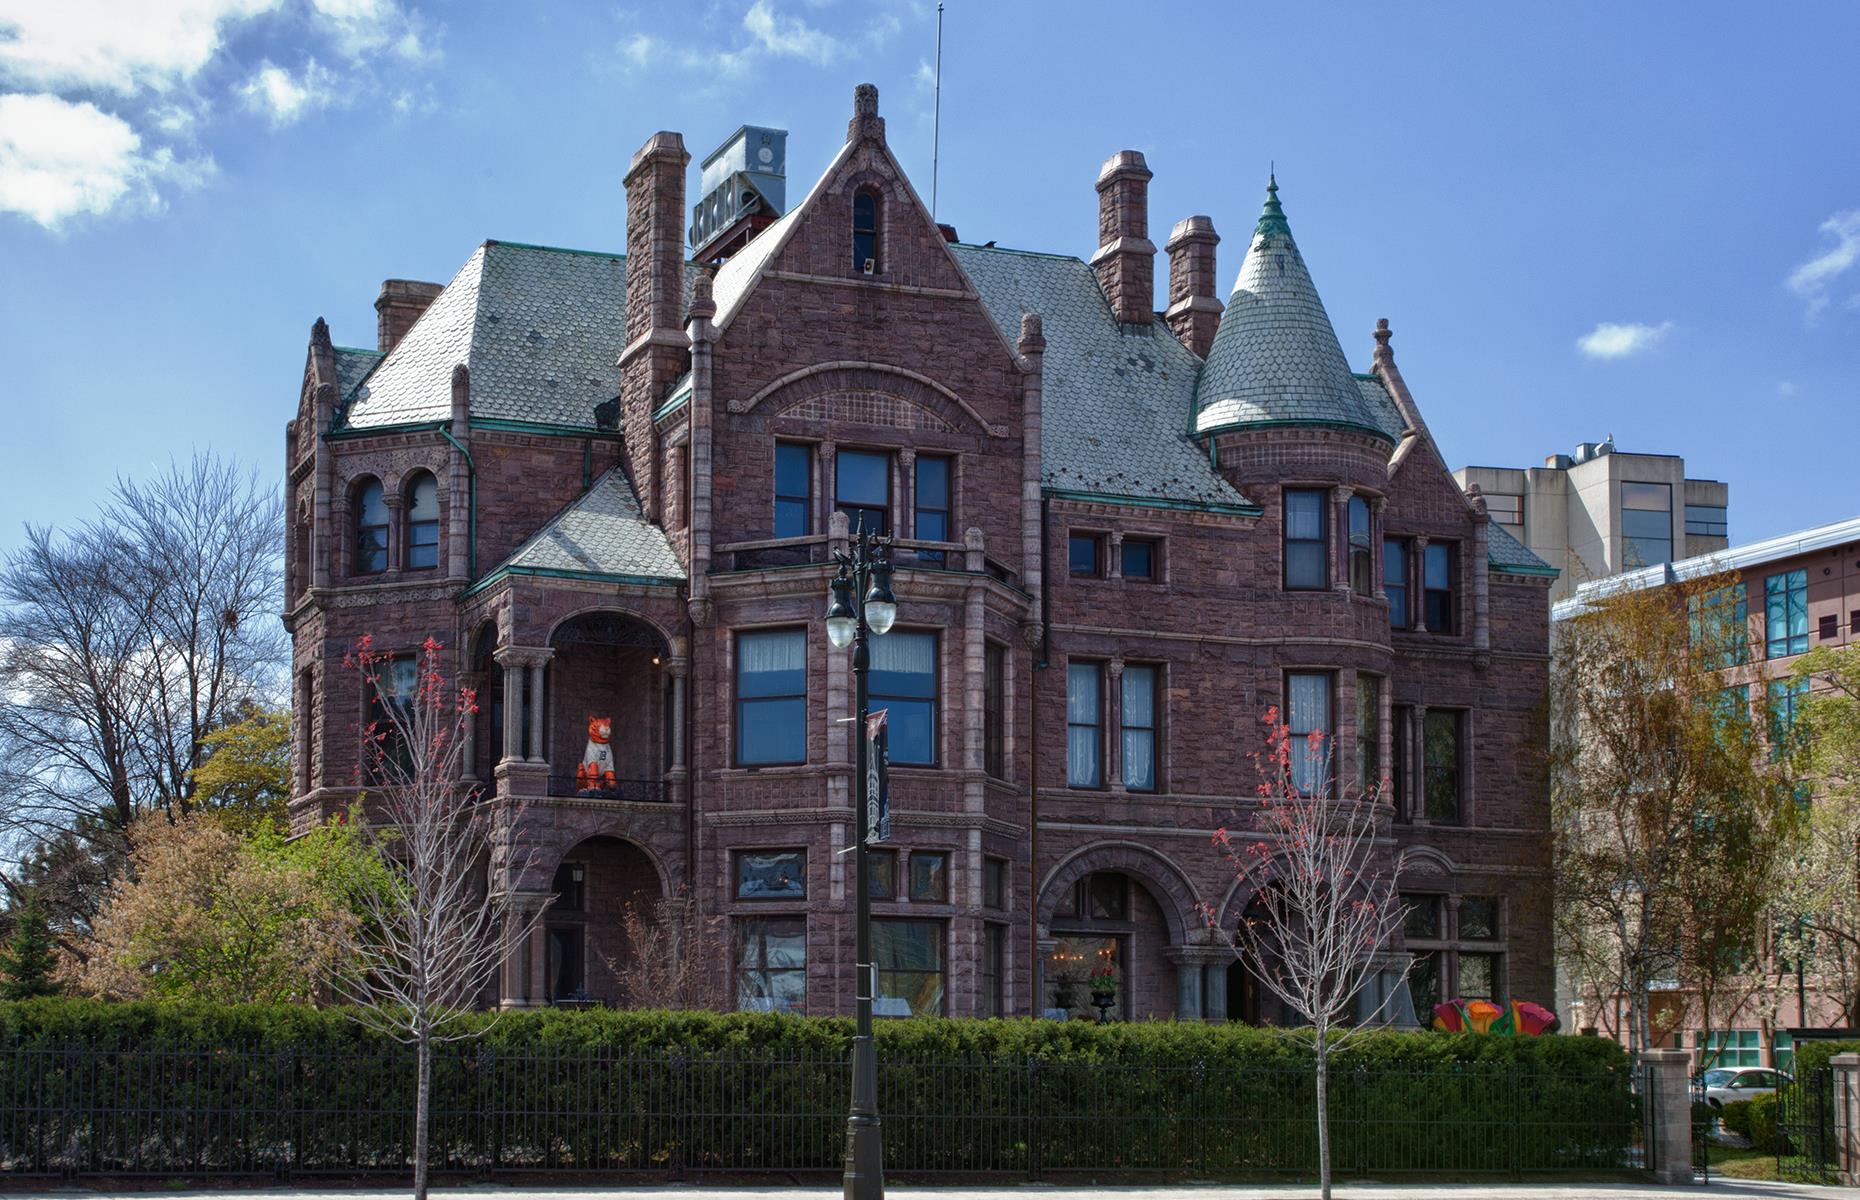 <p>If you're after a side of the supernatural with your slap-up dinner, head to The Whitney, a historic mansion-cum-restaurant in Detroit. It was the home of wealthy lumber baron David Whitney Jr from 1894 – he died at the property, as did his first and second wife – before becoming a hospice for tuberculosis patients. Unsurprisingly, then, modern staff and visitors say the place is haunted. They report seeing ghostly faces in the windows and an elevator that has a mind of its own. The Ghostbar is a nod to the supernatural, while events like the <a href="https://www.thewhitney.com/events/Paranormal-Dinner-Tour">Paranormal Dinner Tour</a> immerse guests in the ghostly goings on.</p>